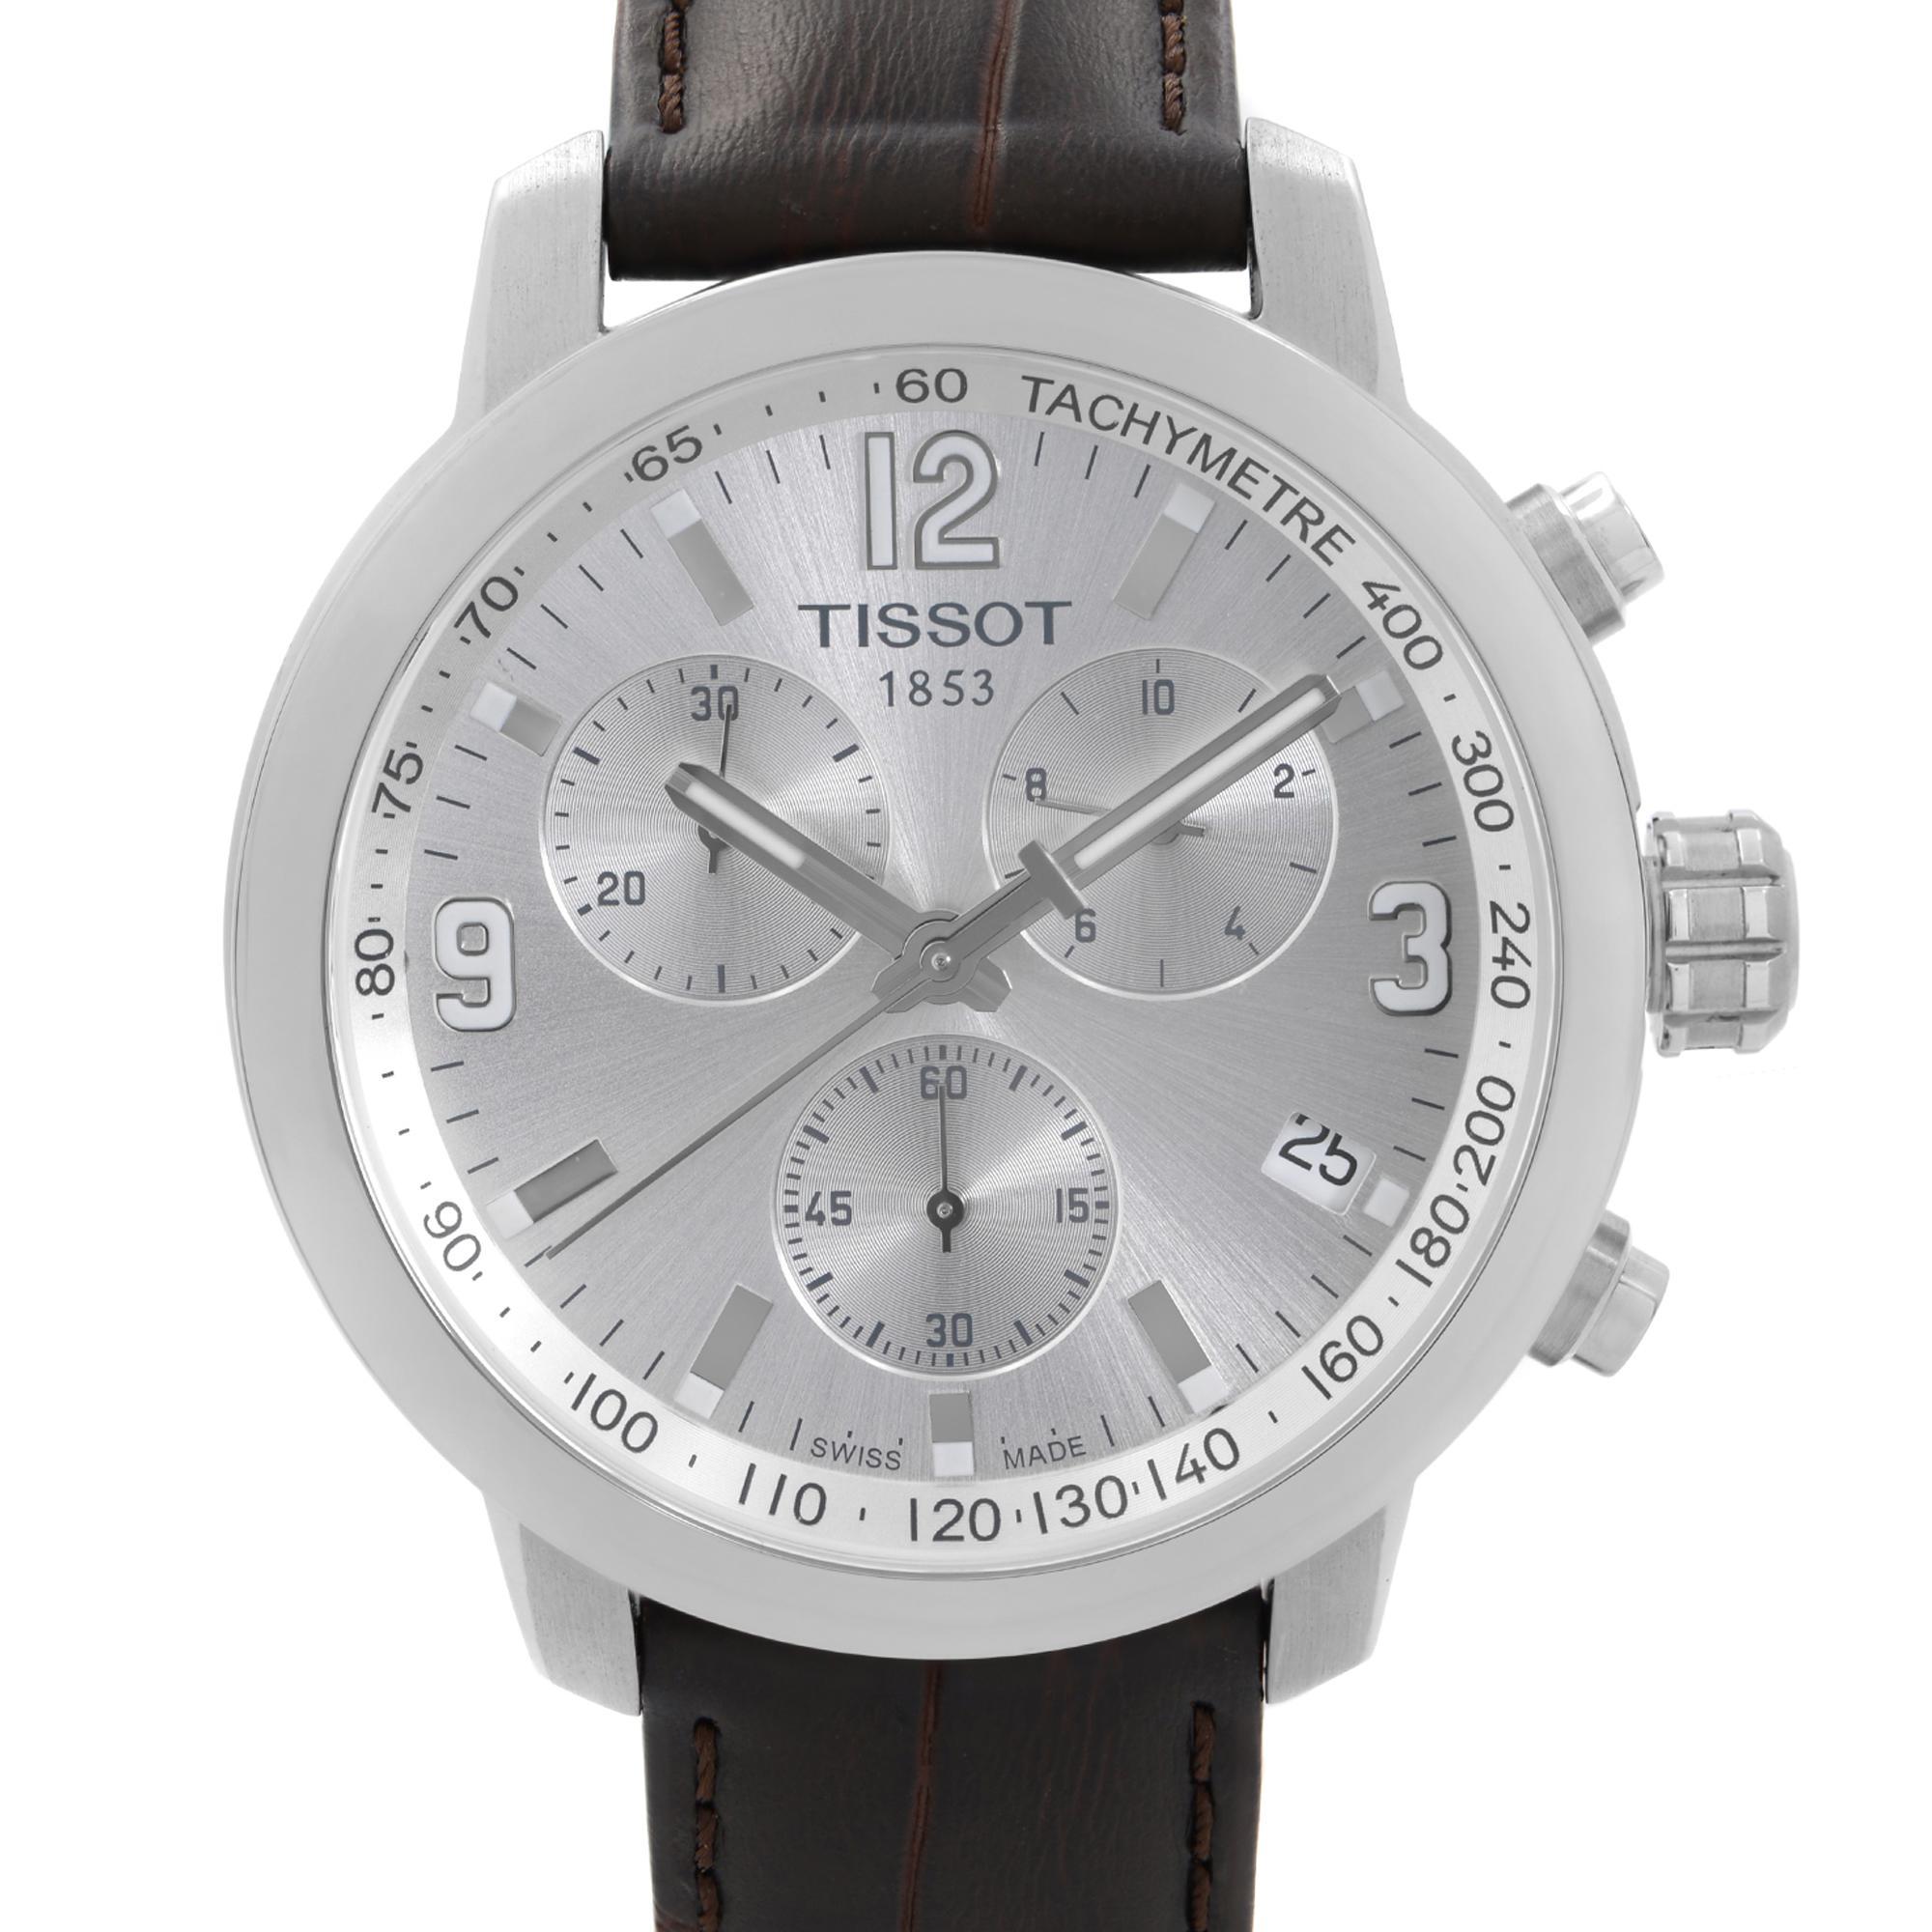 New with defects Tissot PRC 200 Steel Chronograph Silver Dial Quartz Watch T055.417.16.037.00. The watch has never been worn but has some insignificant dry cracks on the inner side of the strap due to aging while storing. This Beautiful Mens